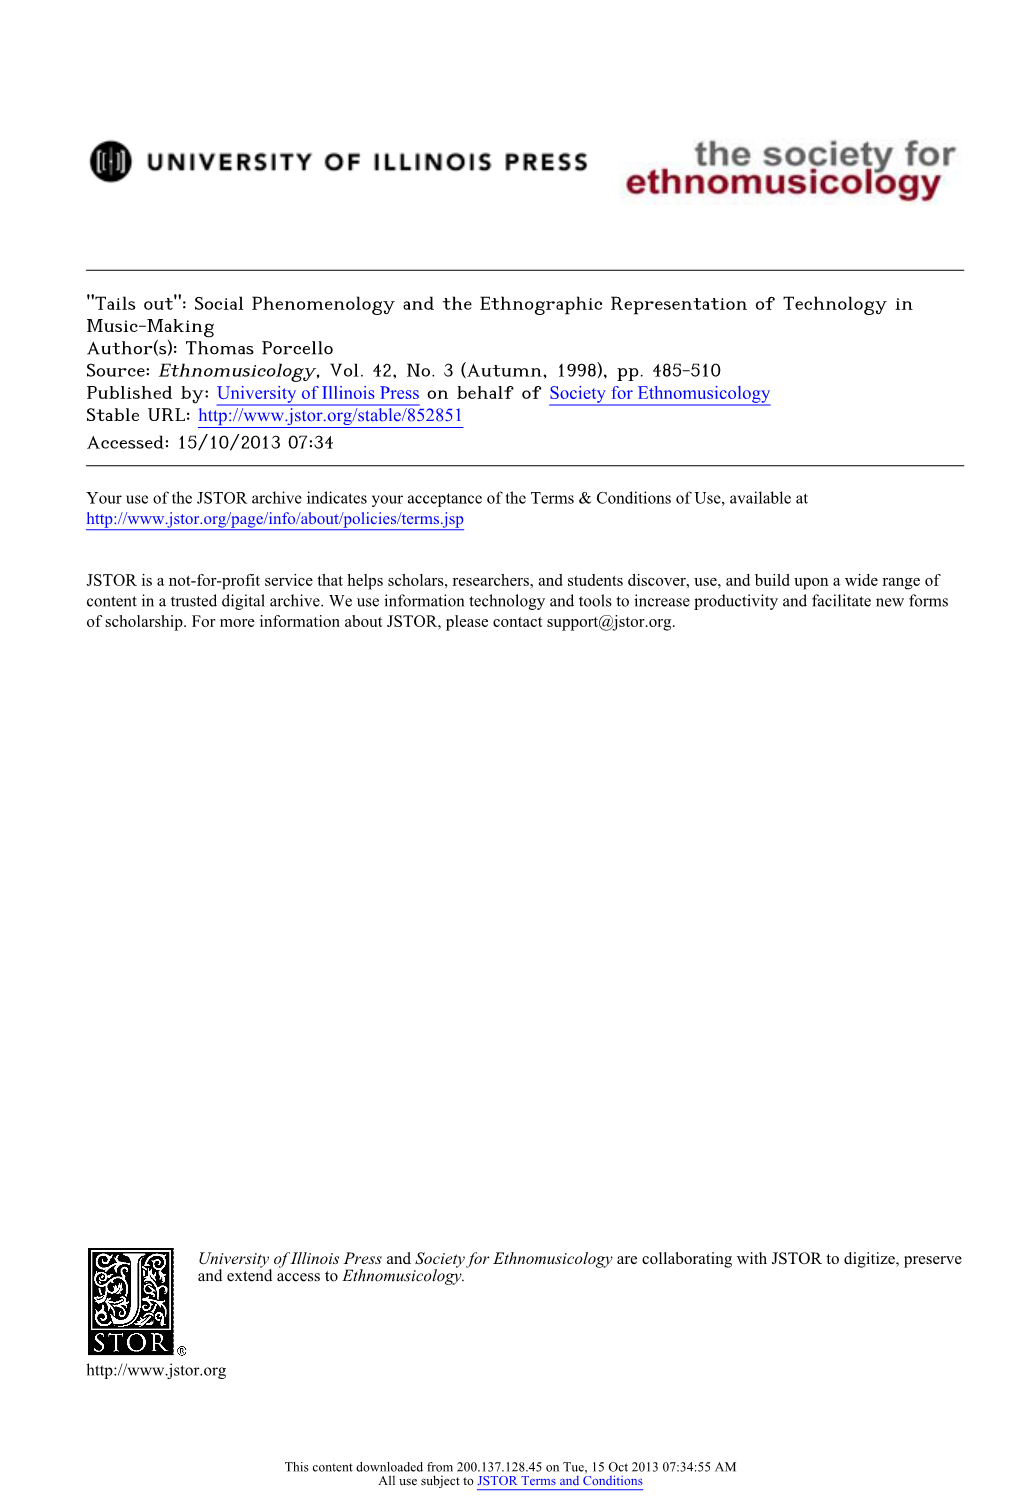 Social Phenomenology and the Ethnographic Representation of Technology in Music-Making Author(S): Thomas Porcello Source: Ethnomusicology, Vol